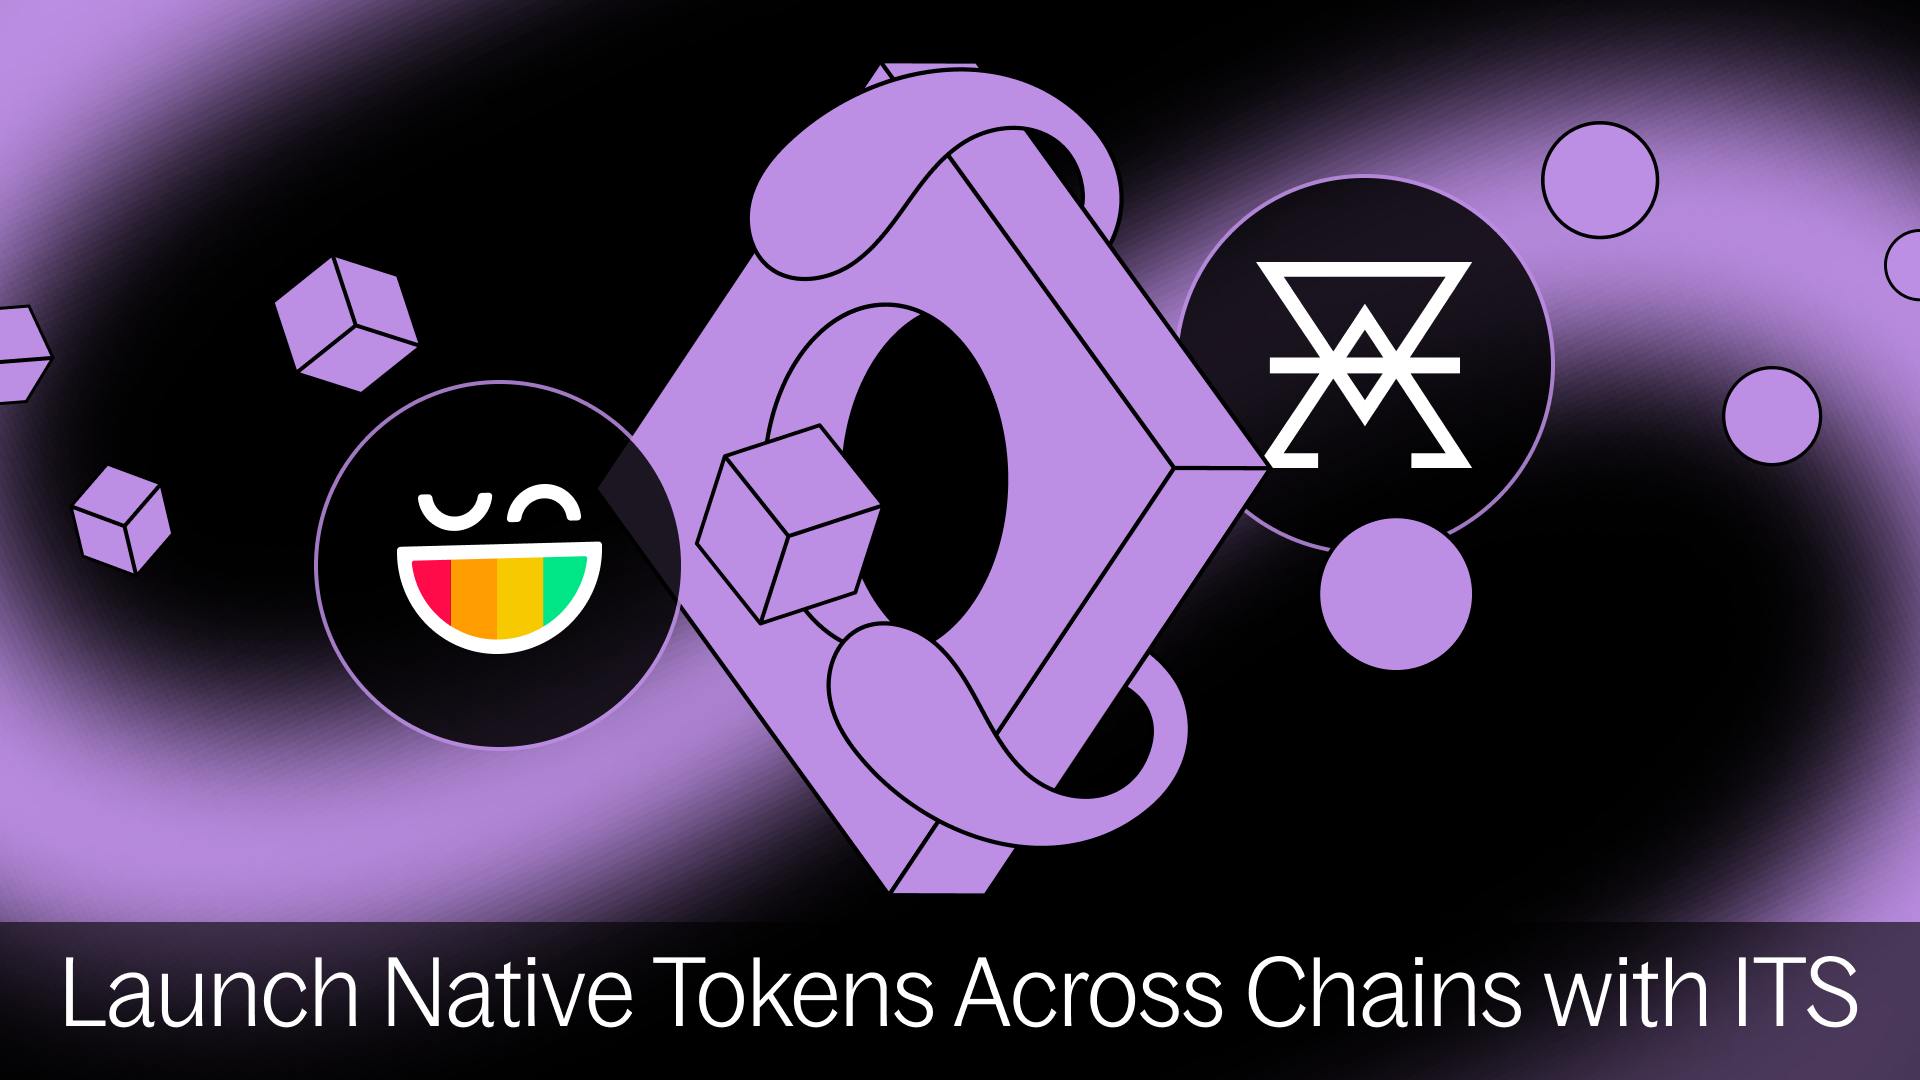 Launching Native Tokens Across Chains with ITS